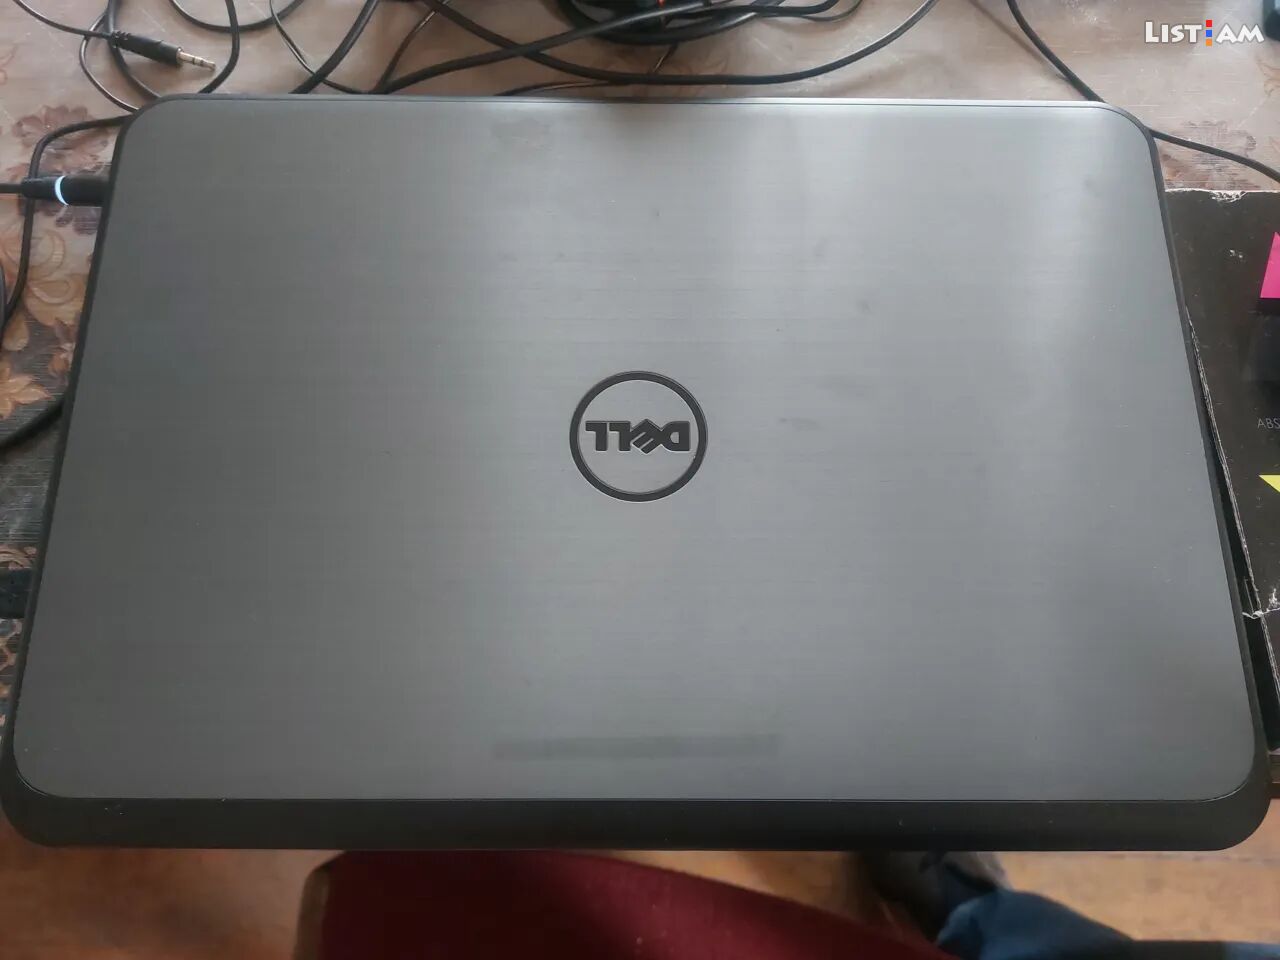 Dell notebook